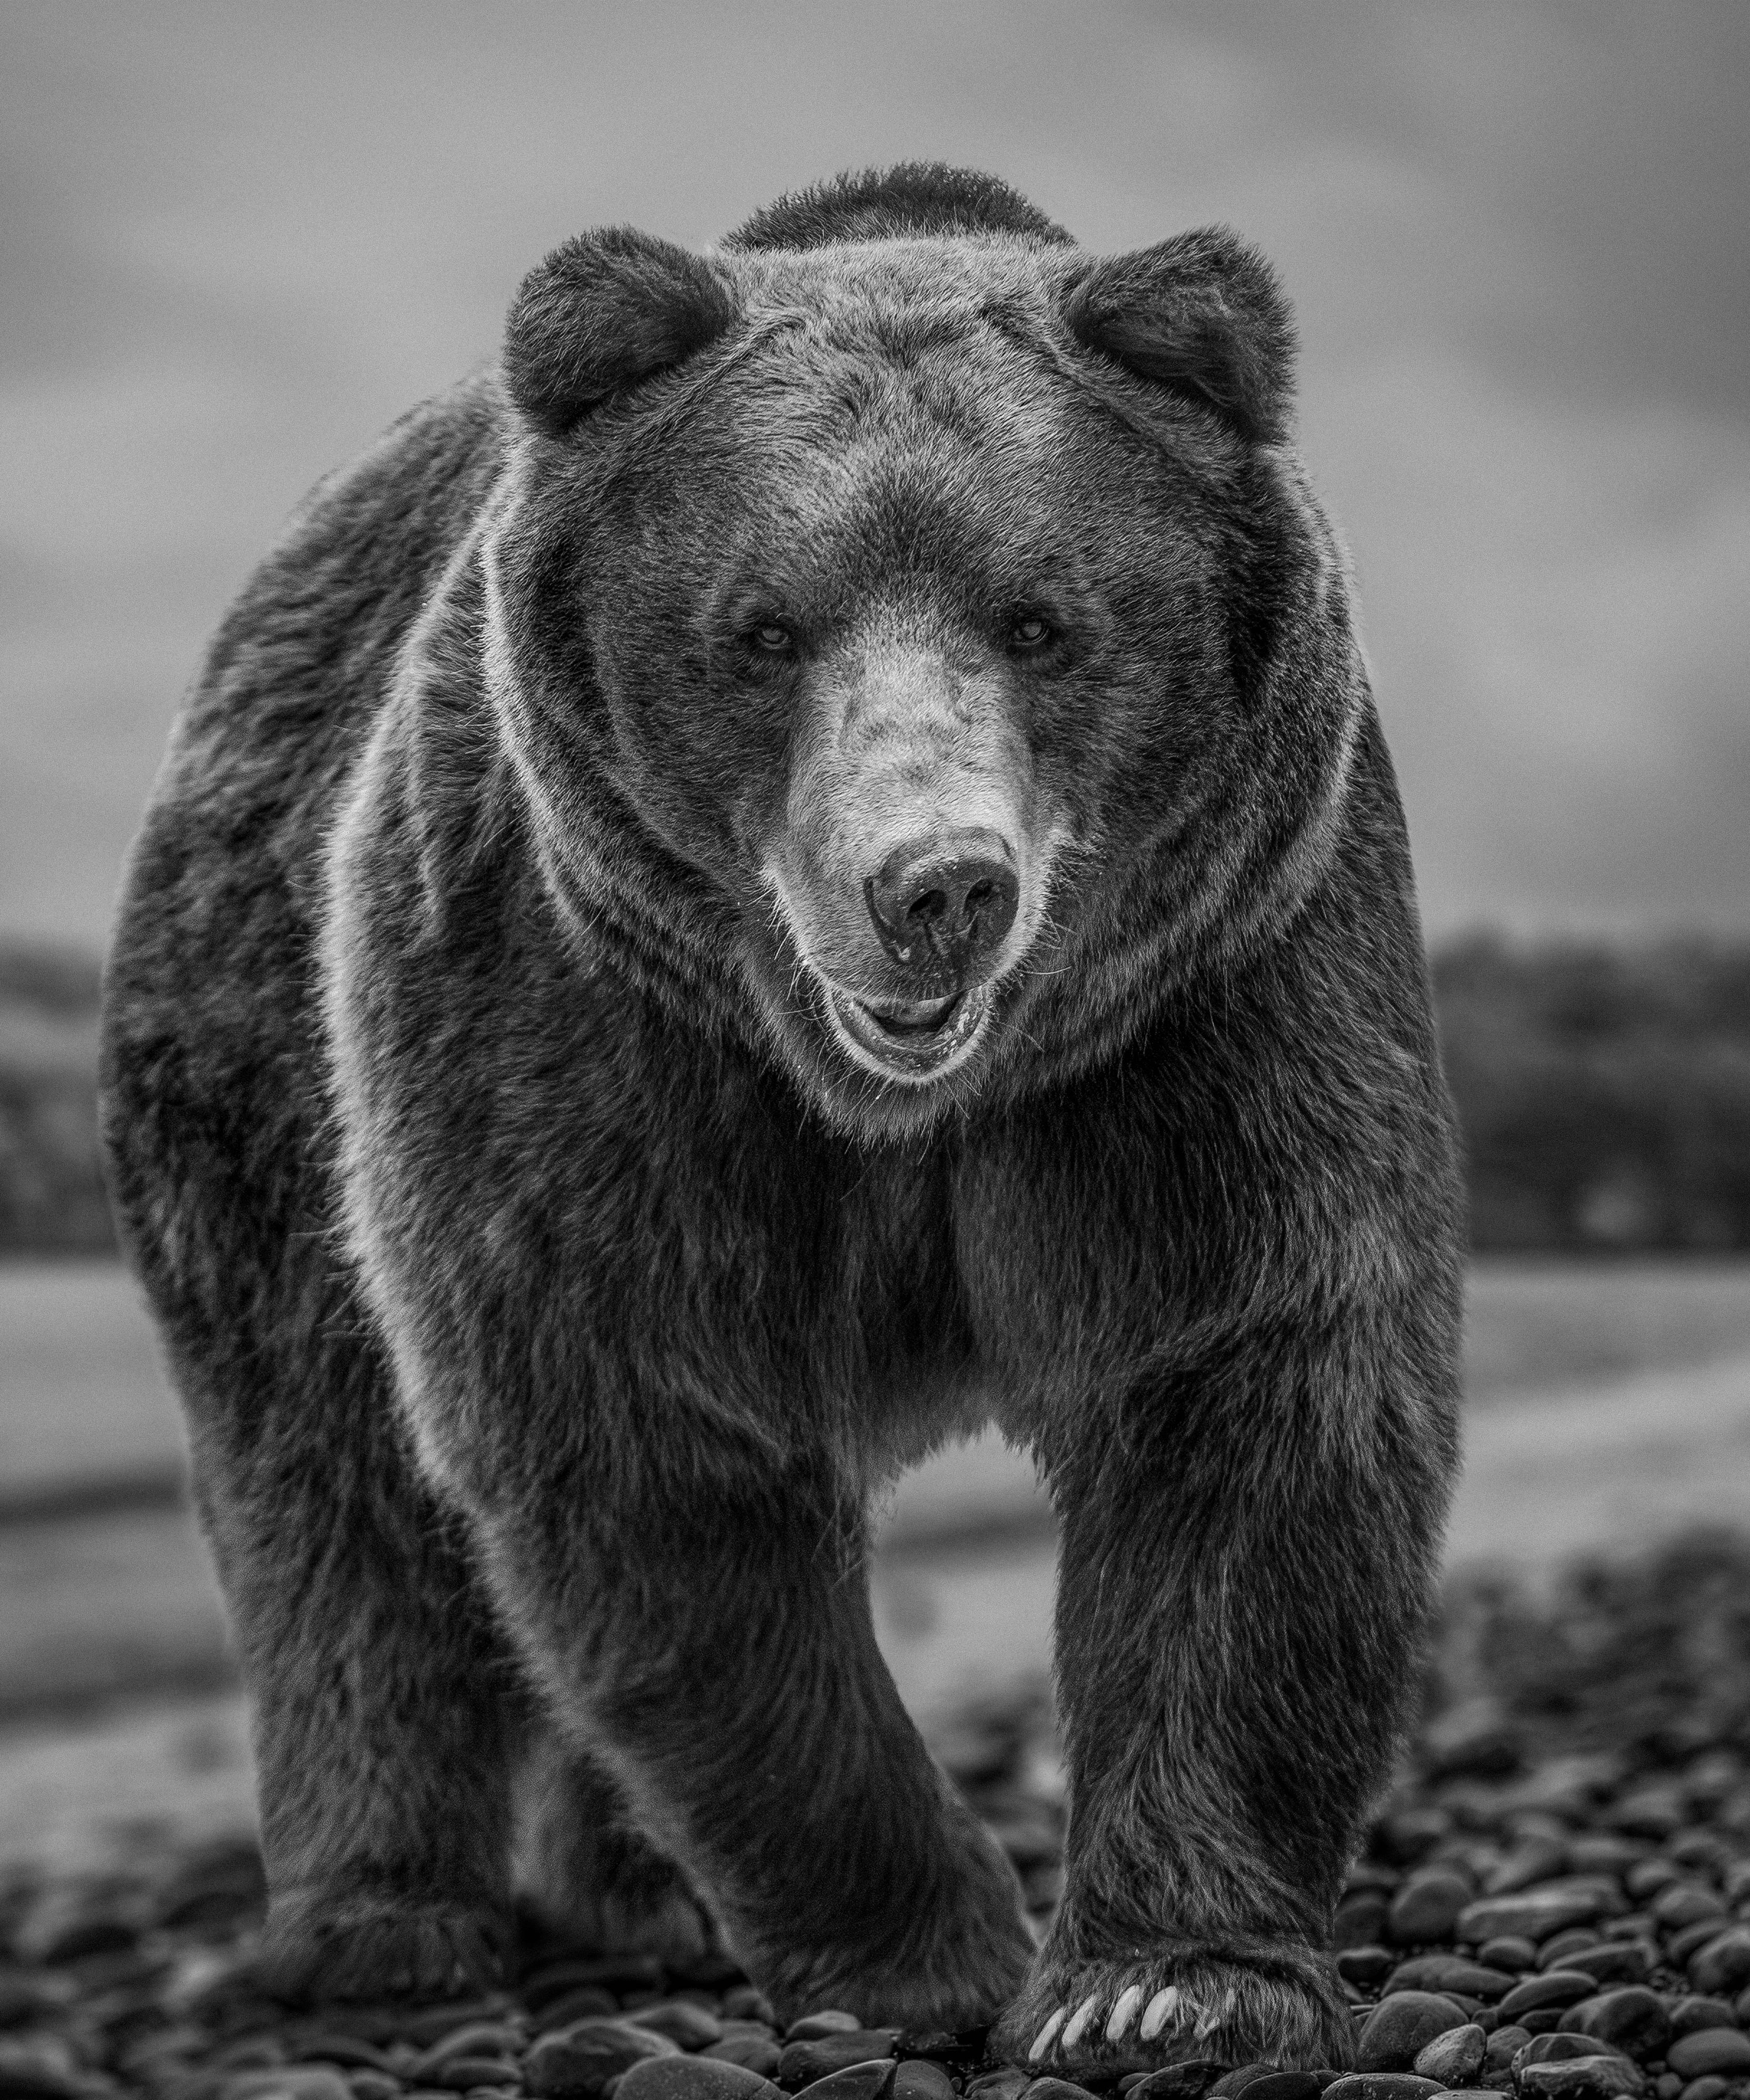 Shane Russeck Animal Print - Bear Beach - 48x36 Black & White Photography, Brown, Grizzly Bear Unsigned